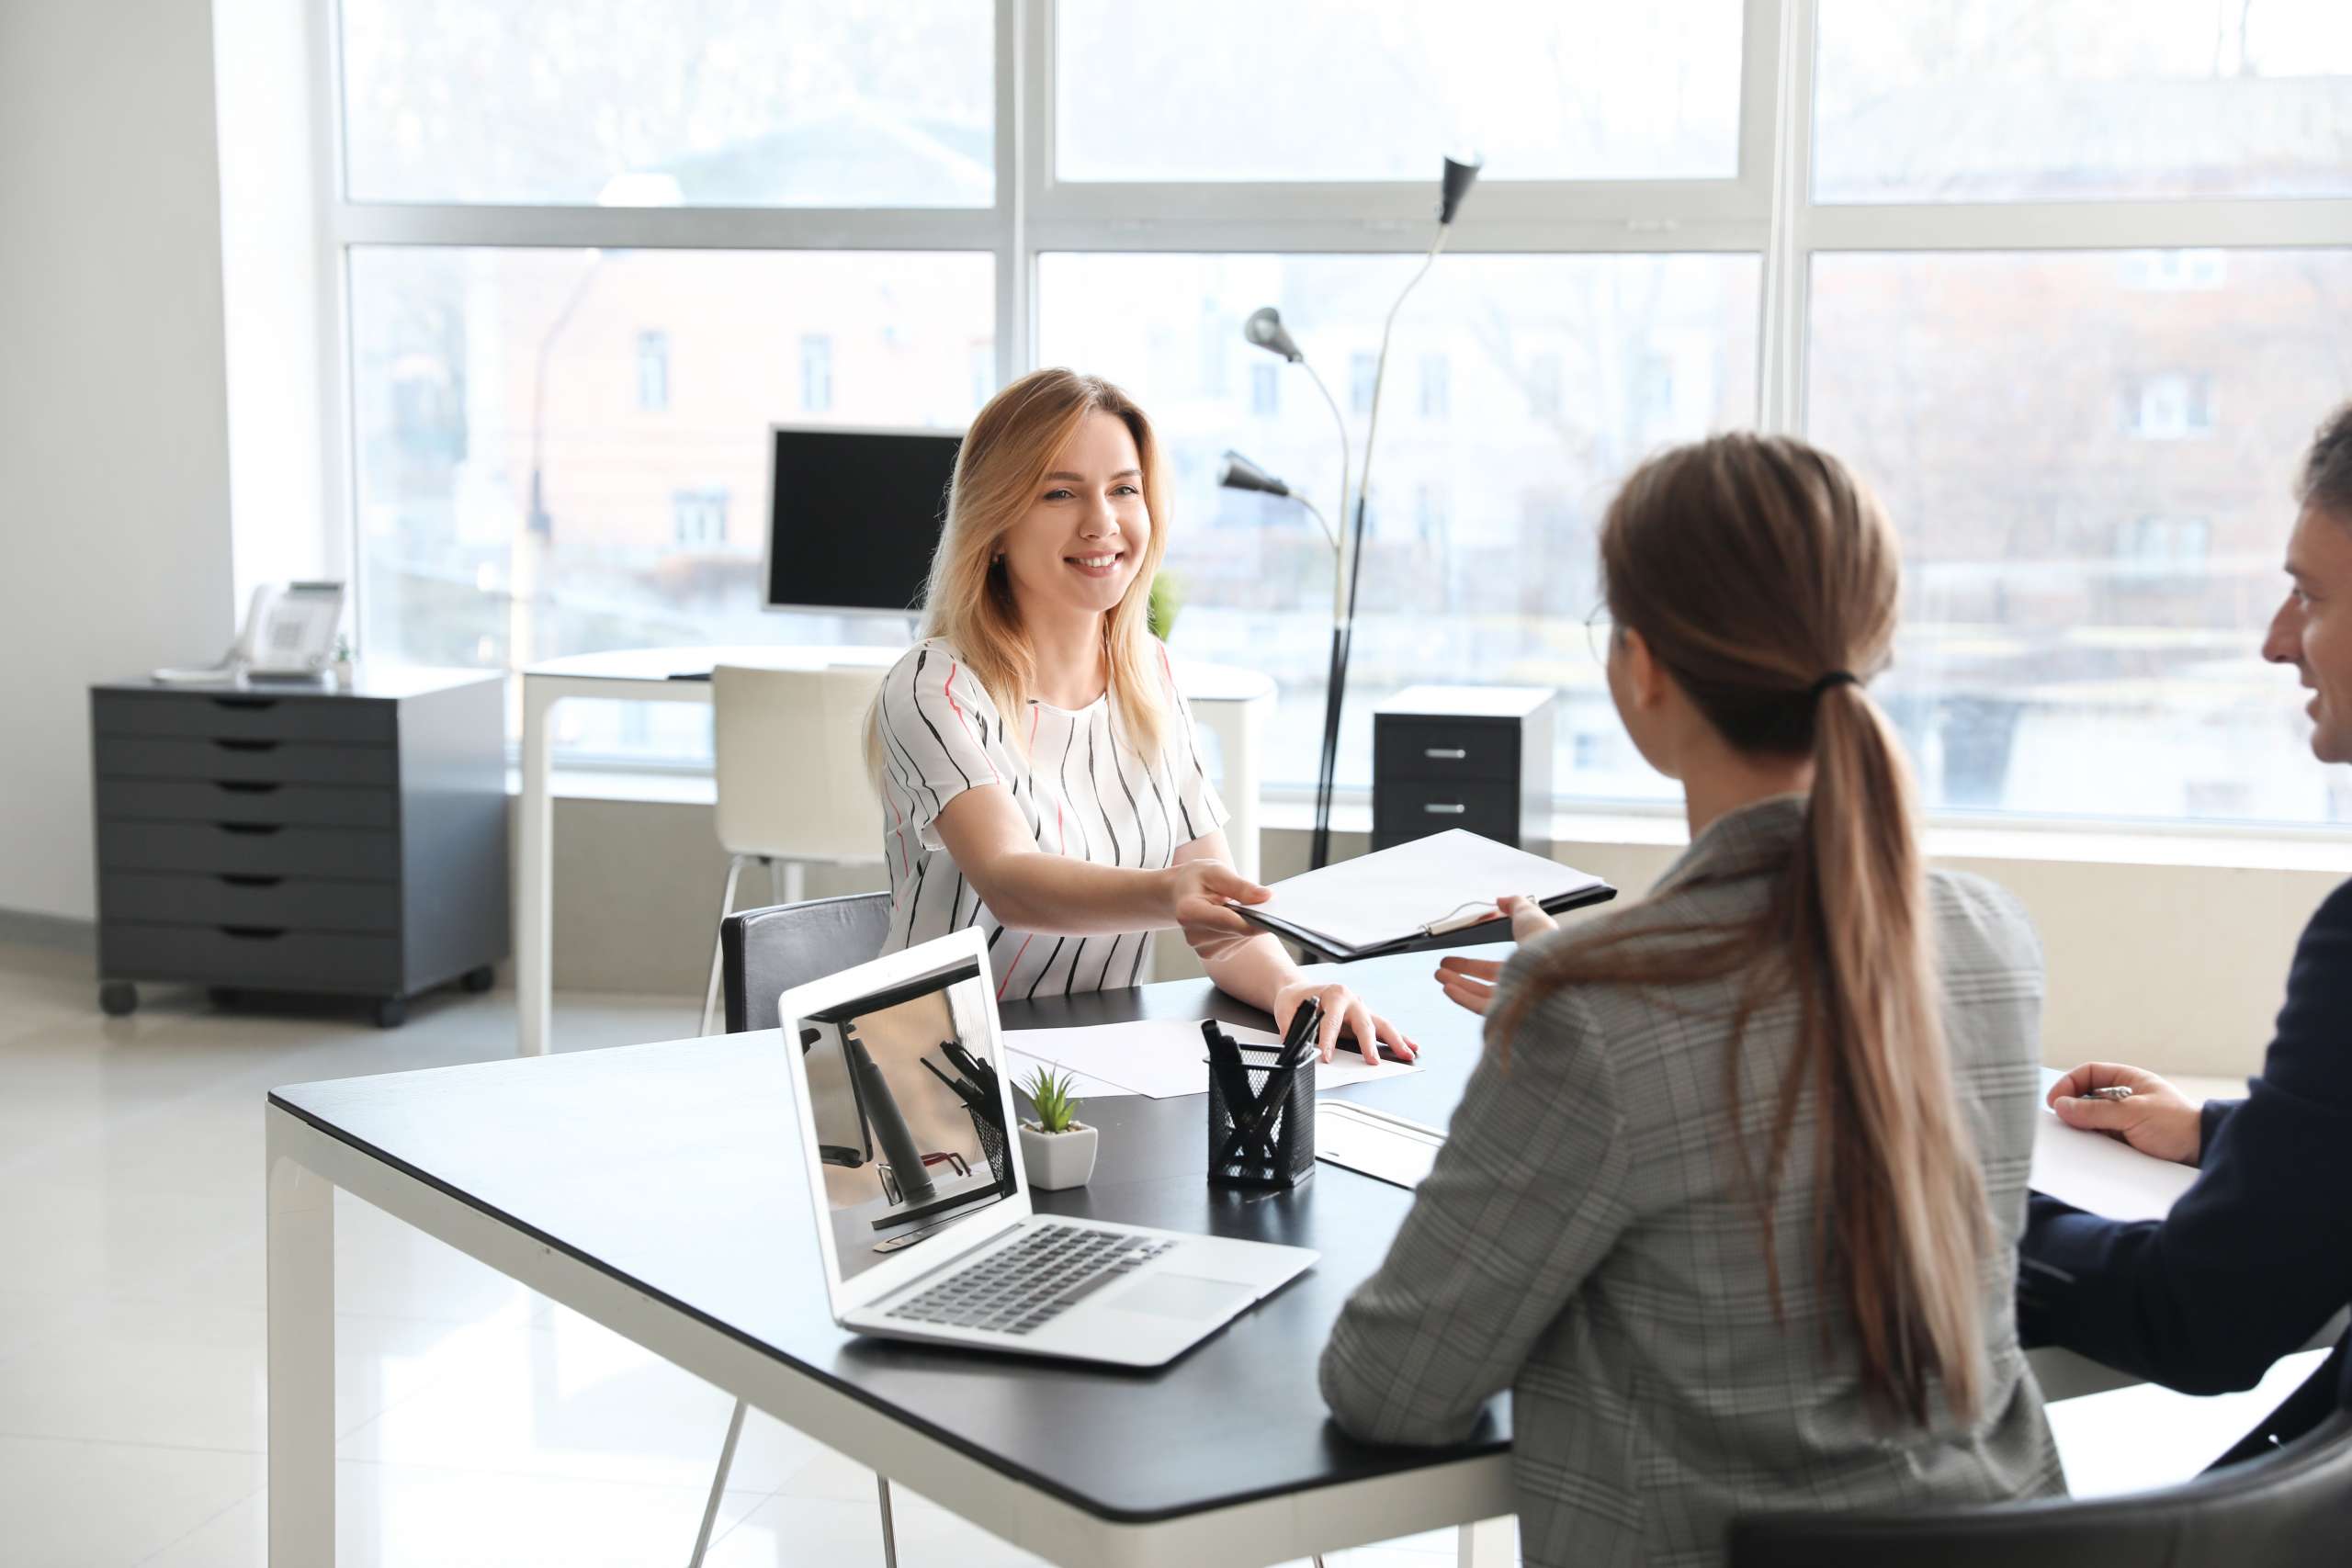 Human resources officer interviewing woman in office